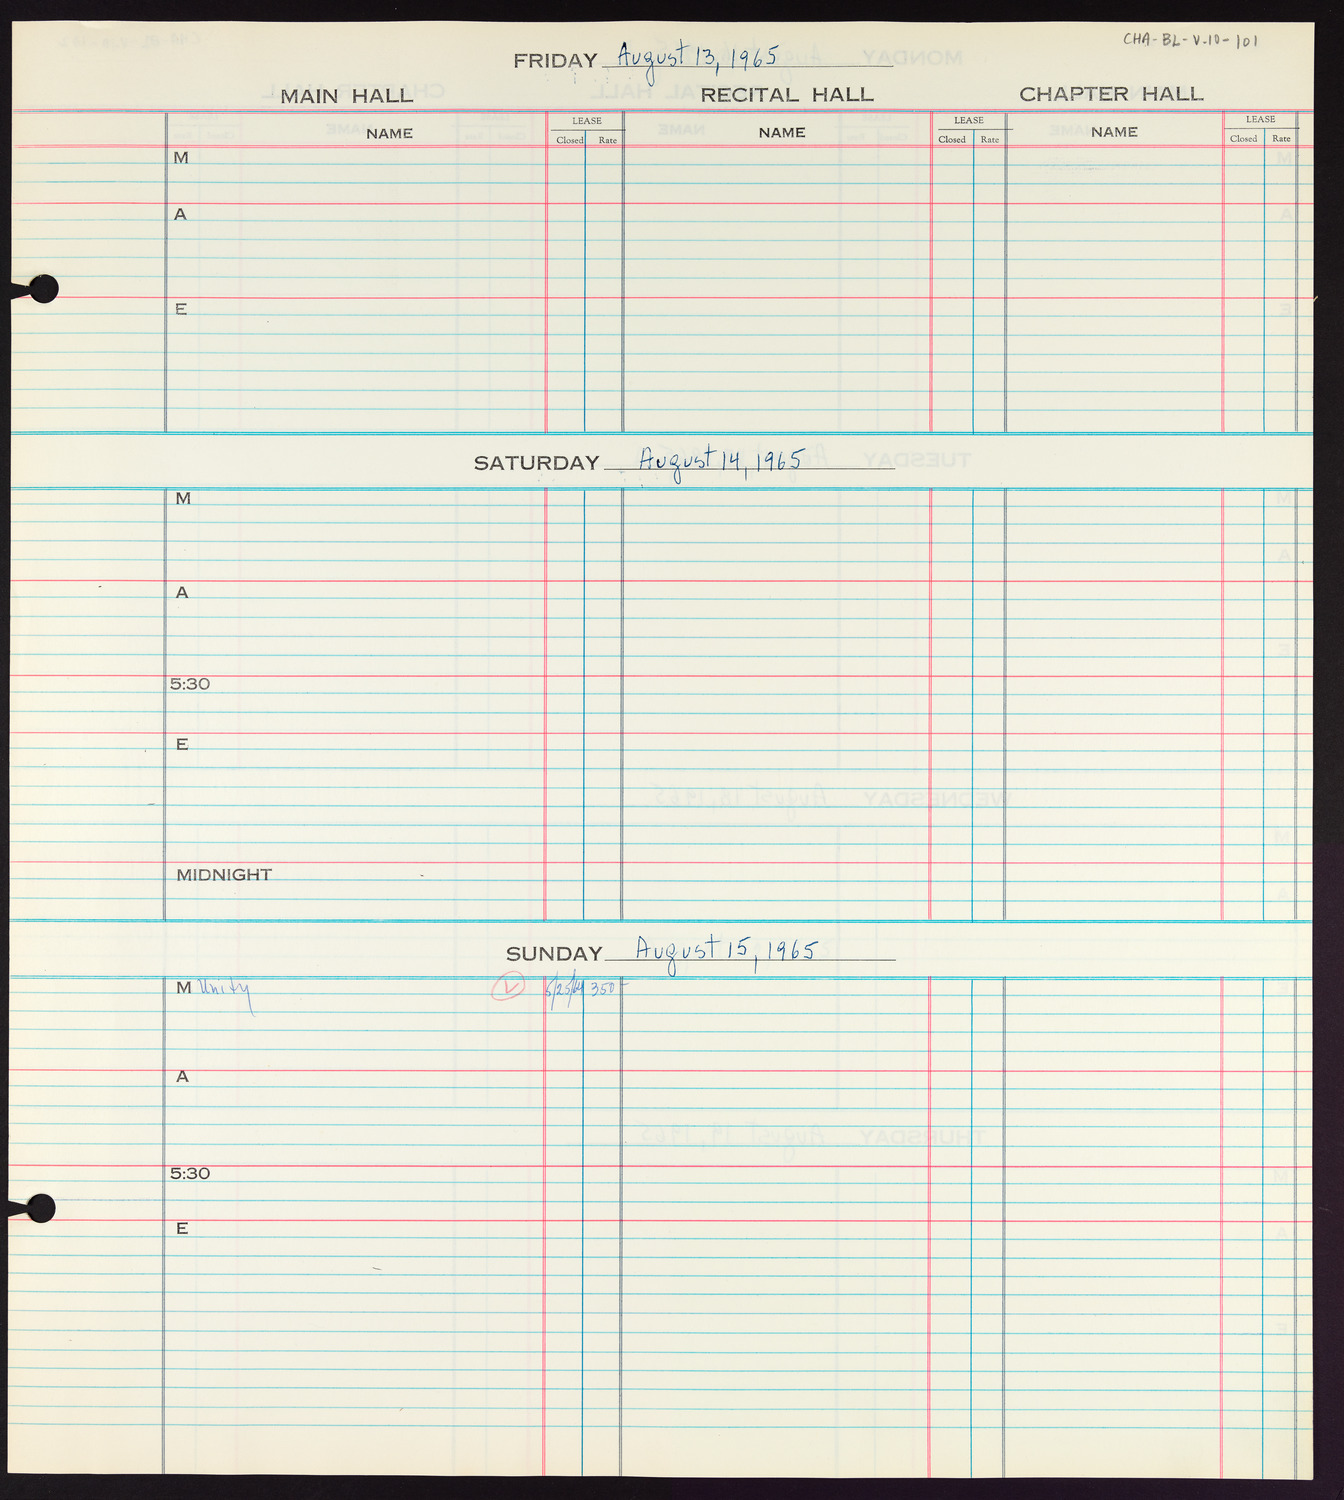 Carnegie Hall Booking Ledger, volume 10, page 101